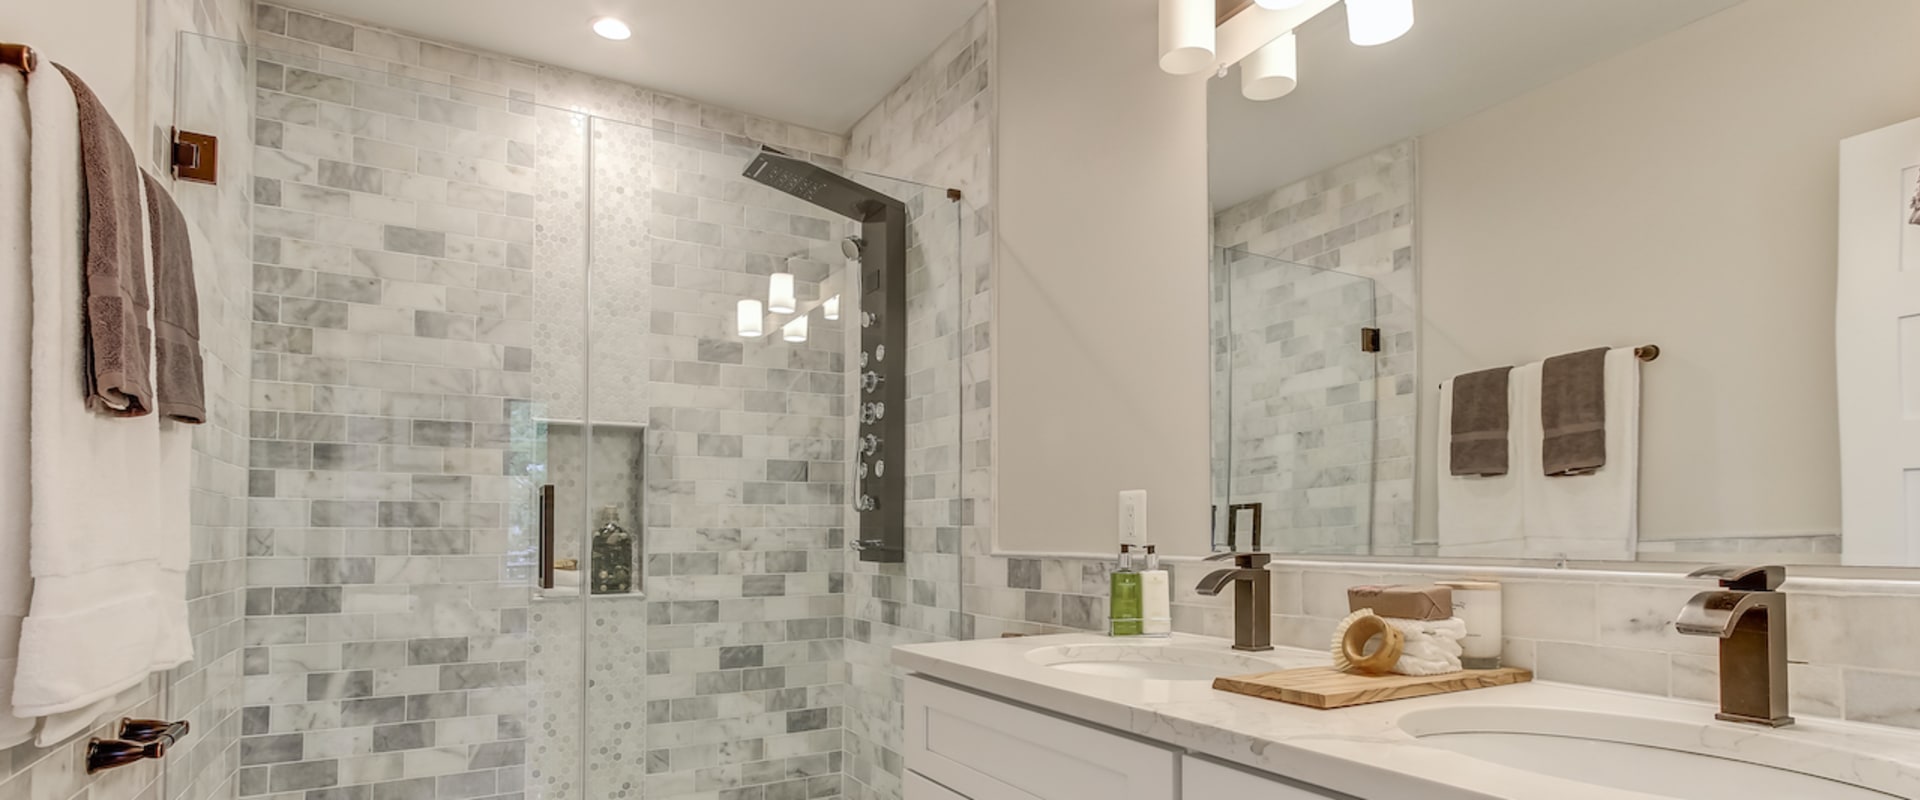 Why are bathroom renovations so expensive?